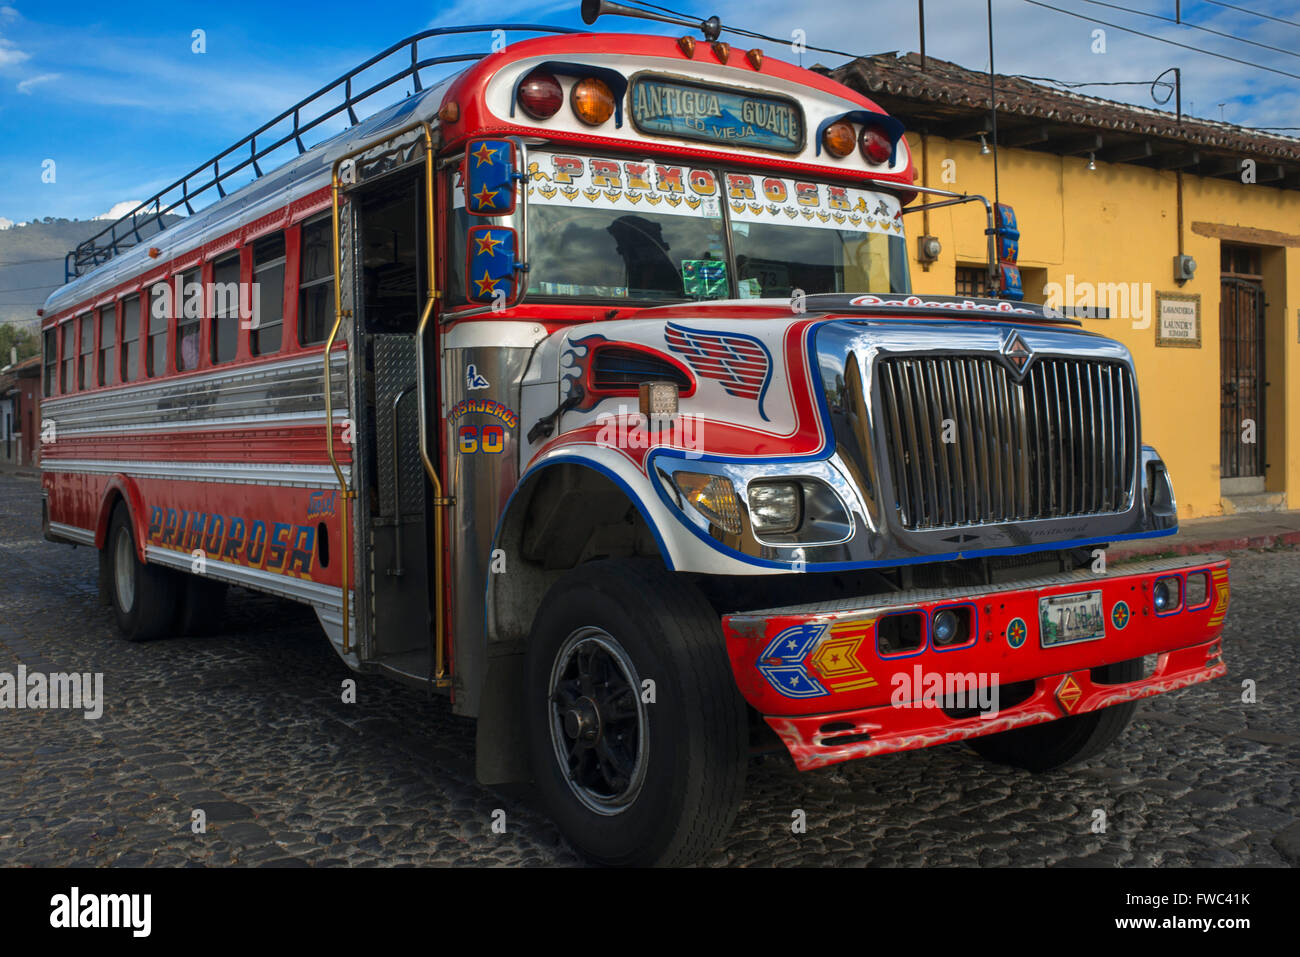 Chicken bus, Antigua, Guatemala, Central America. Antigua, typical colorful and decorated bus. Stock Photo